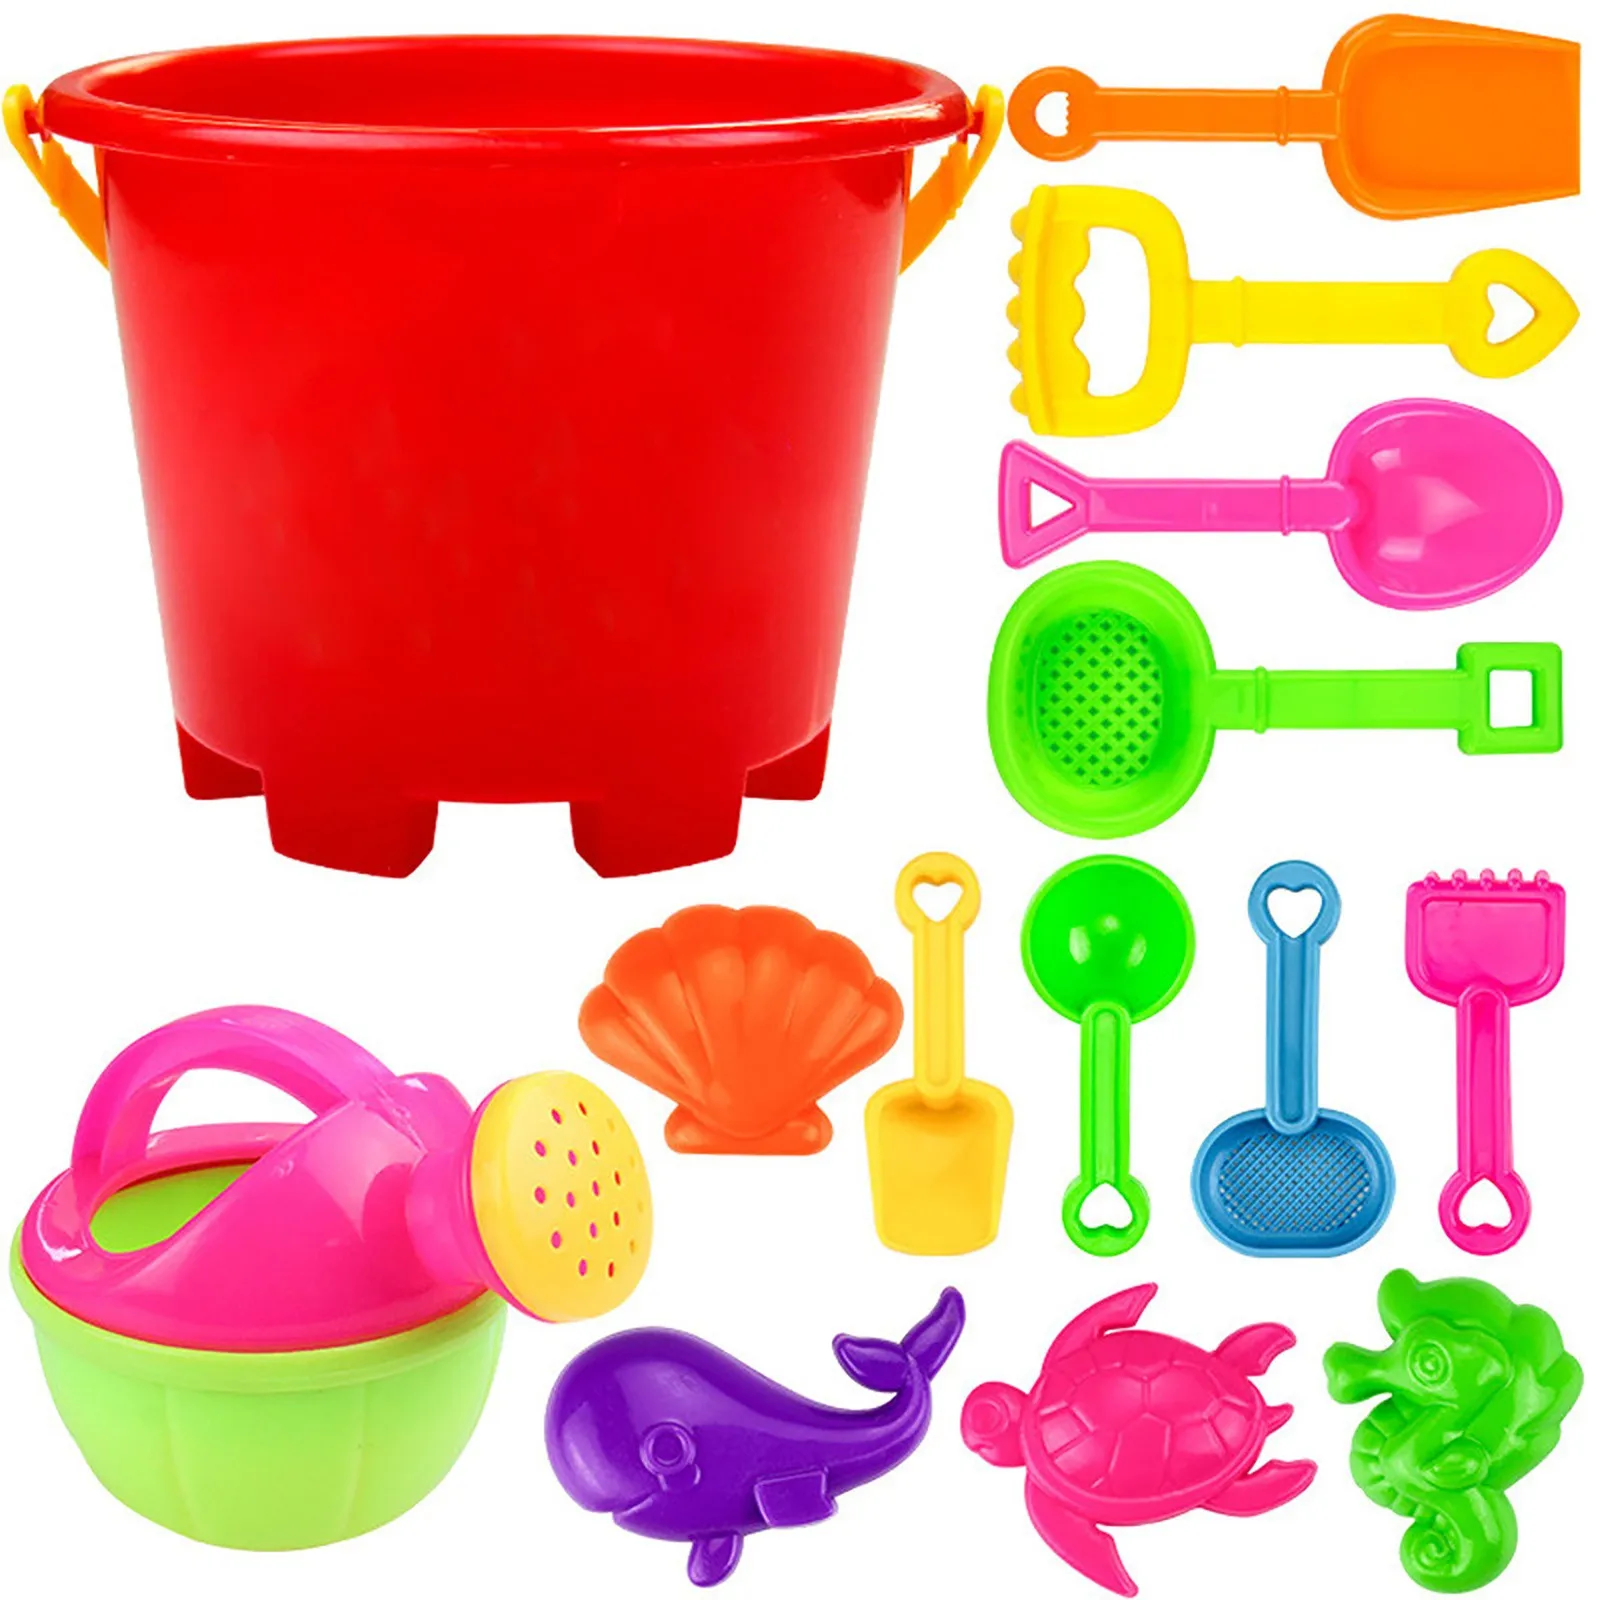 

14pcs Beach Tools Set Sand Playing Toys For Kids Fun Water Beach Seaside Tools Child Sandglass Shovel Tool Gifts Storage Toy